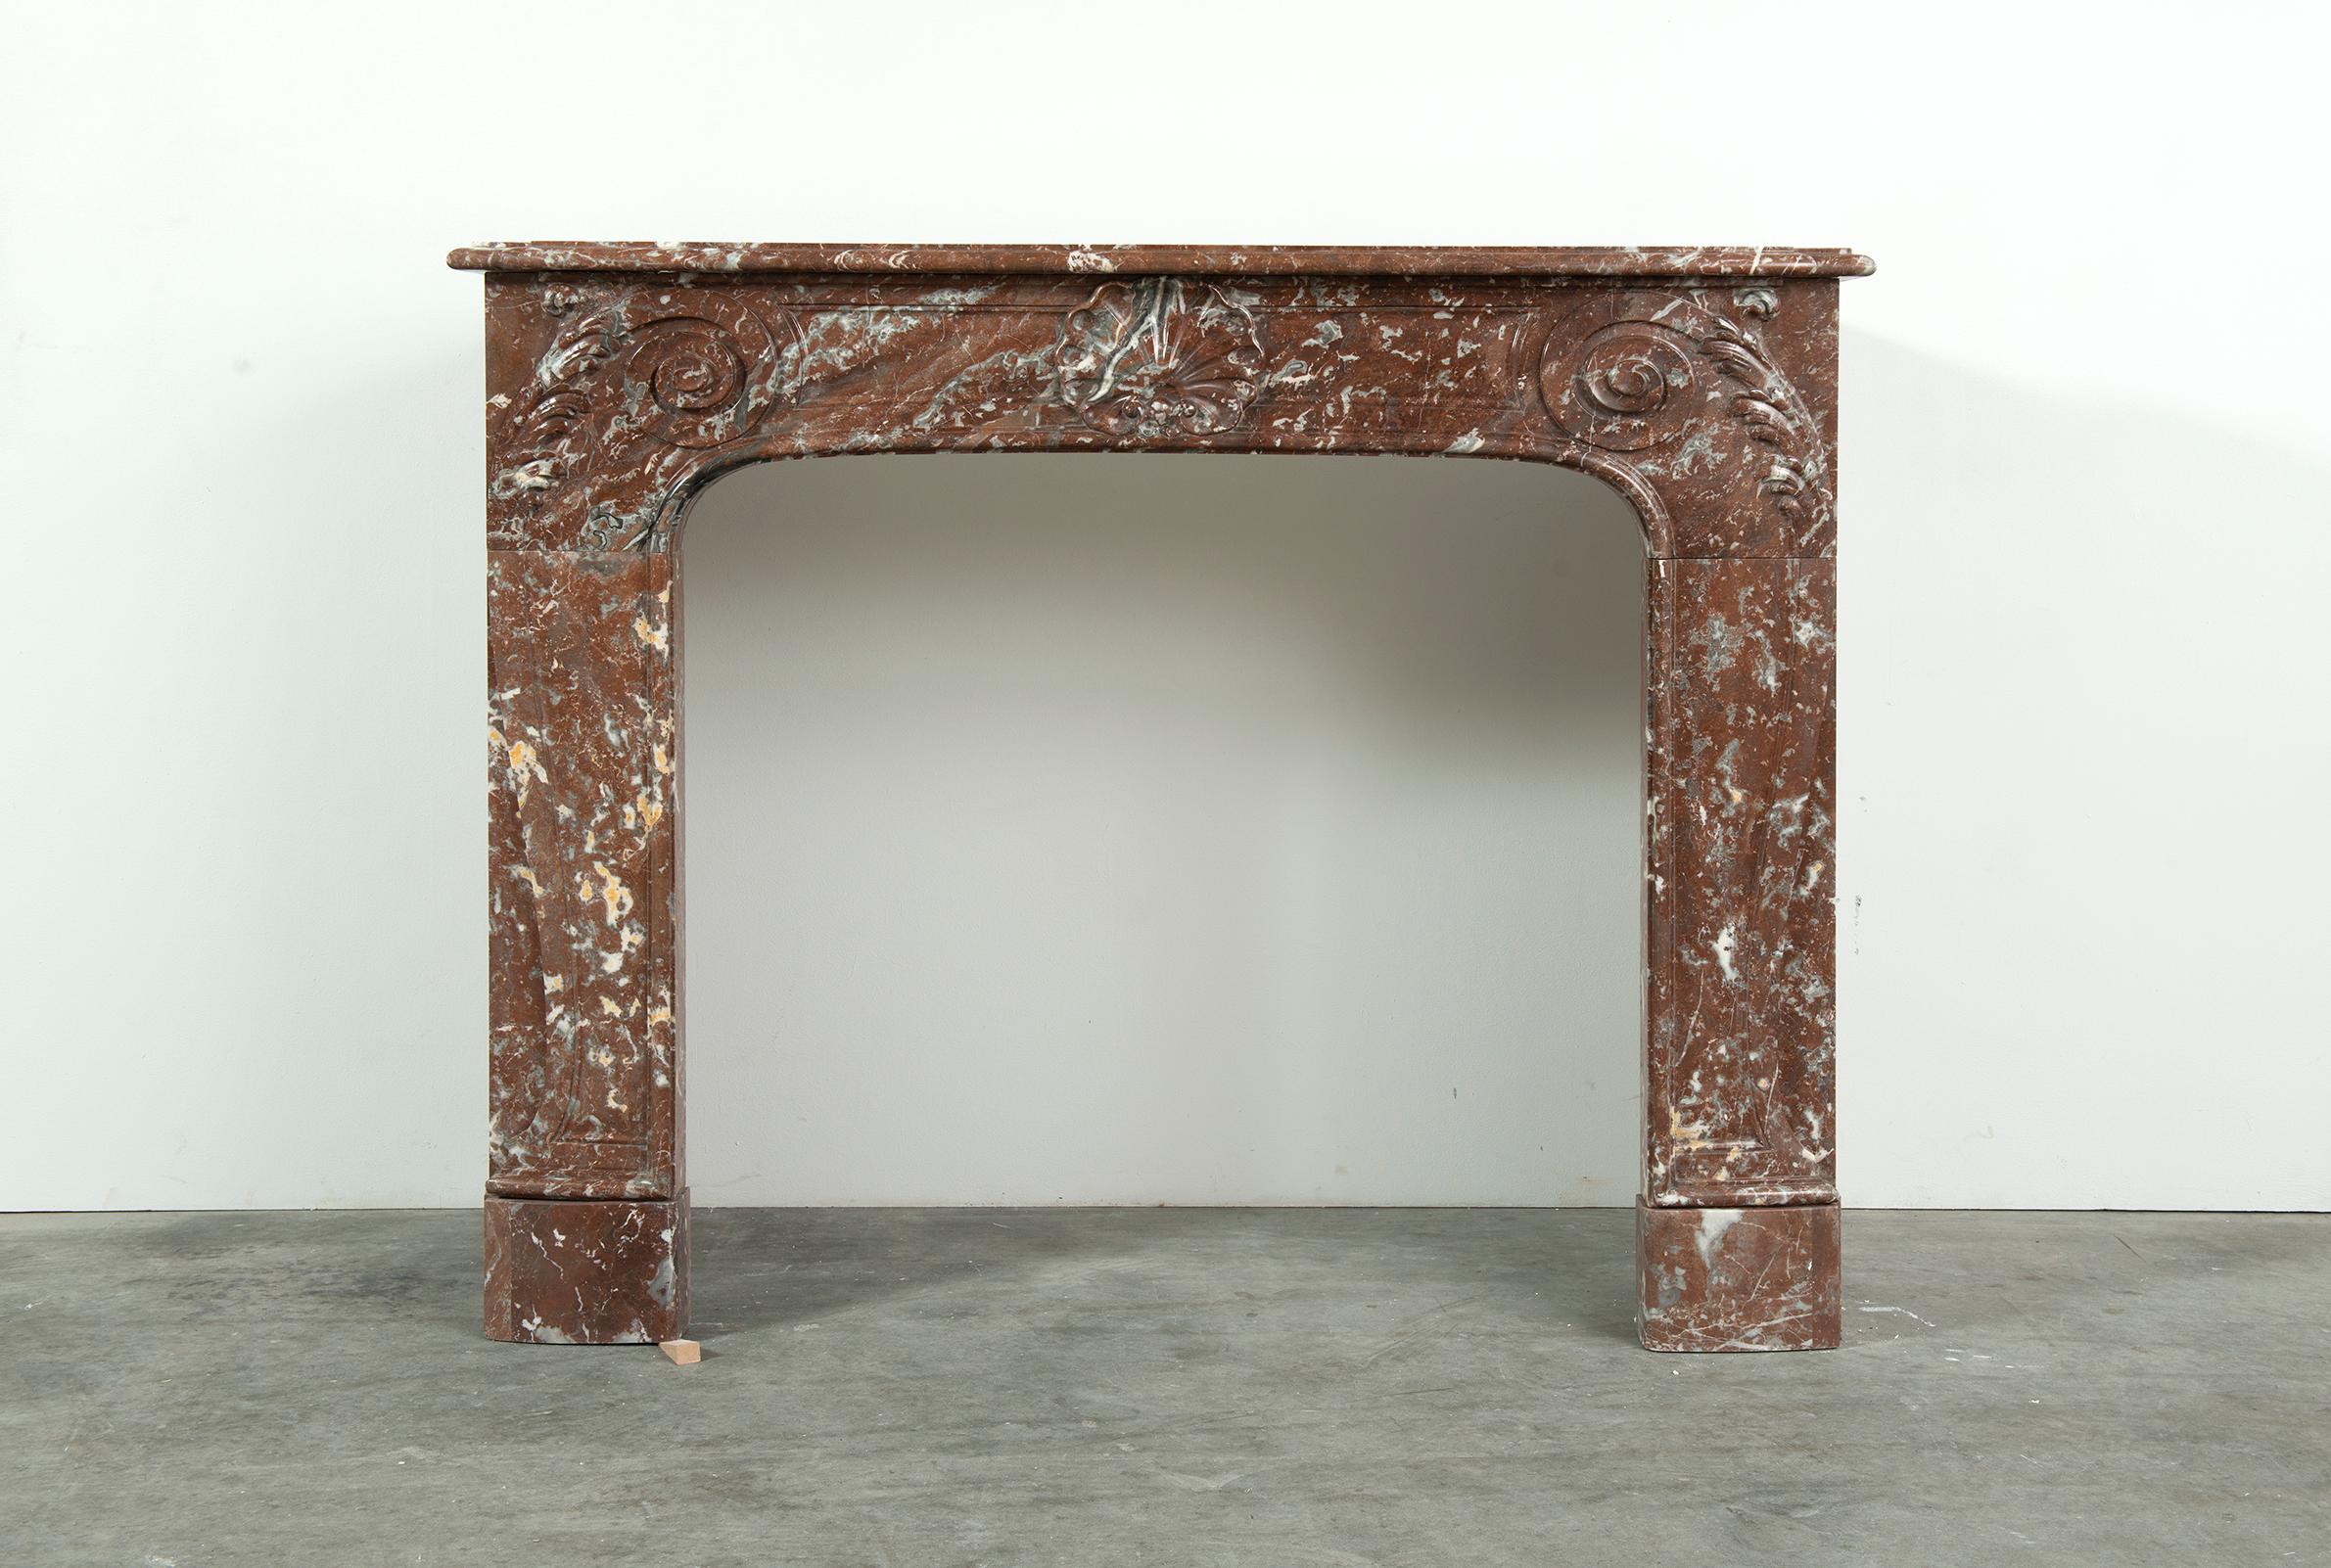 19th century Rouge de Mazy marble Louis XV fireplace mantel. Opening measurements: 34.6 x 39.8 inch (height x width).